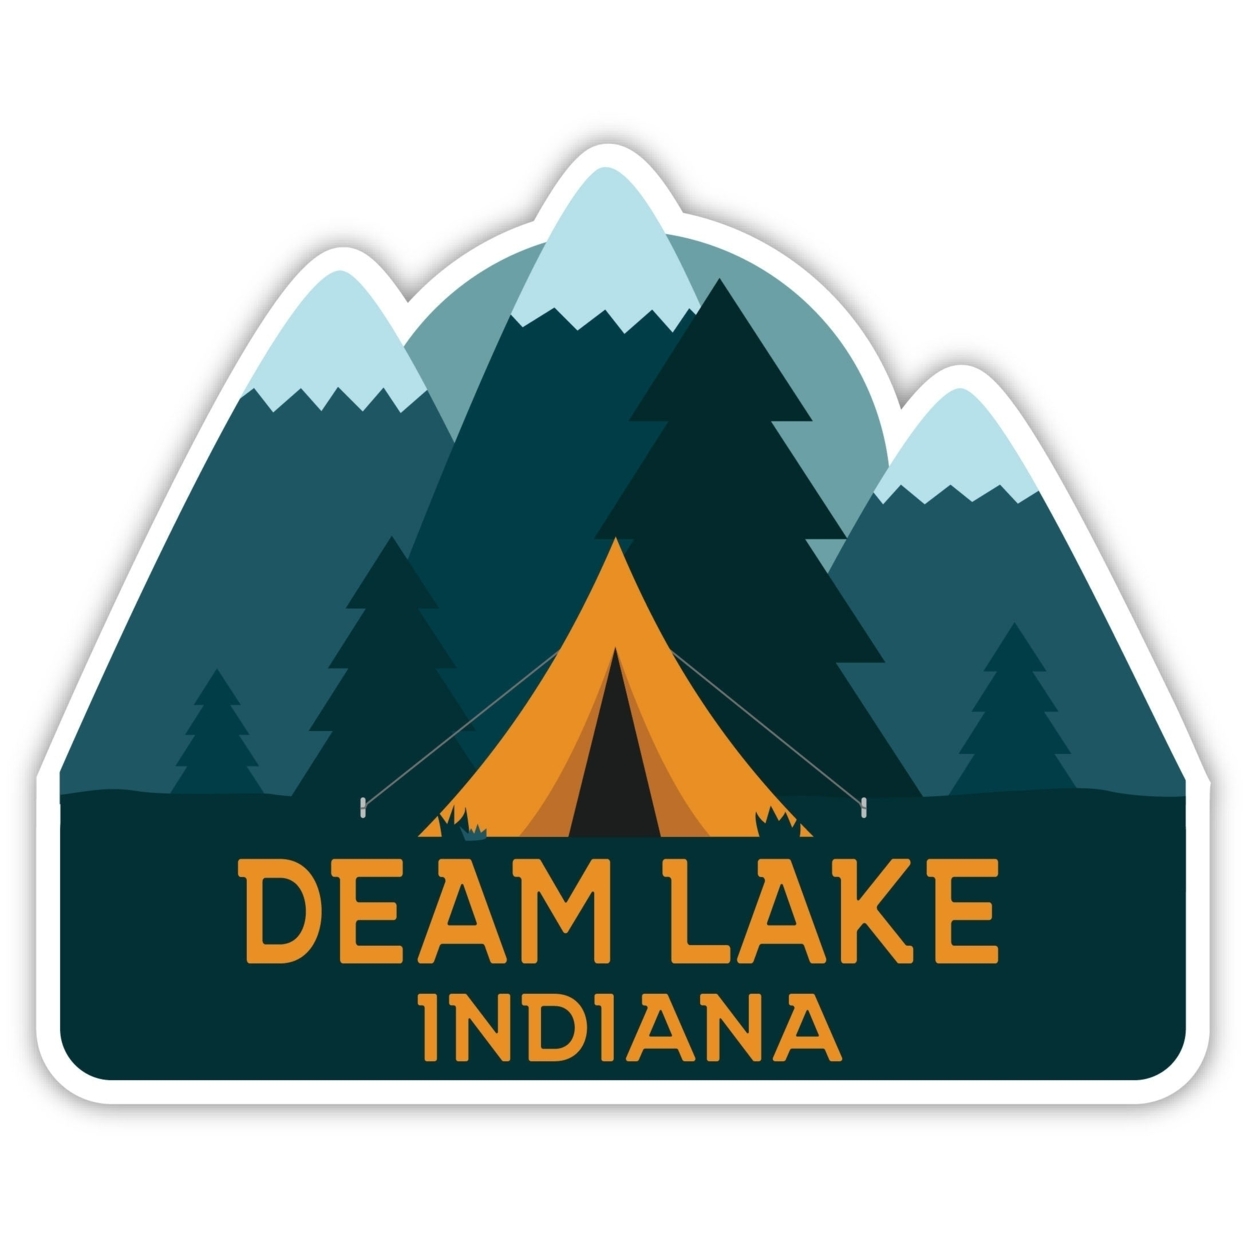 Deam Lake Indiana Souvenir Decorative Stickers (Choose Theme And Size) - 4-Pack, 6-Inch, Tent